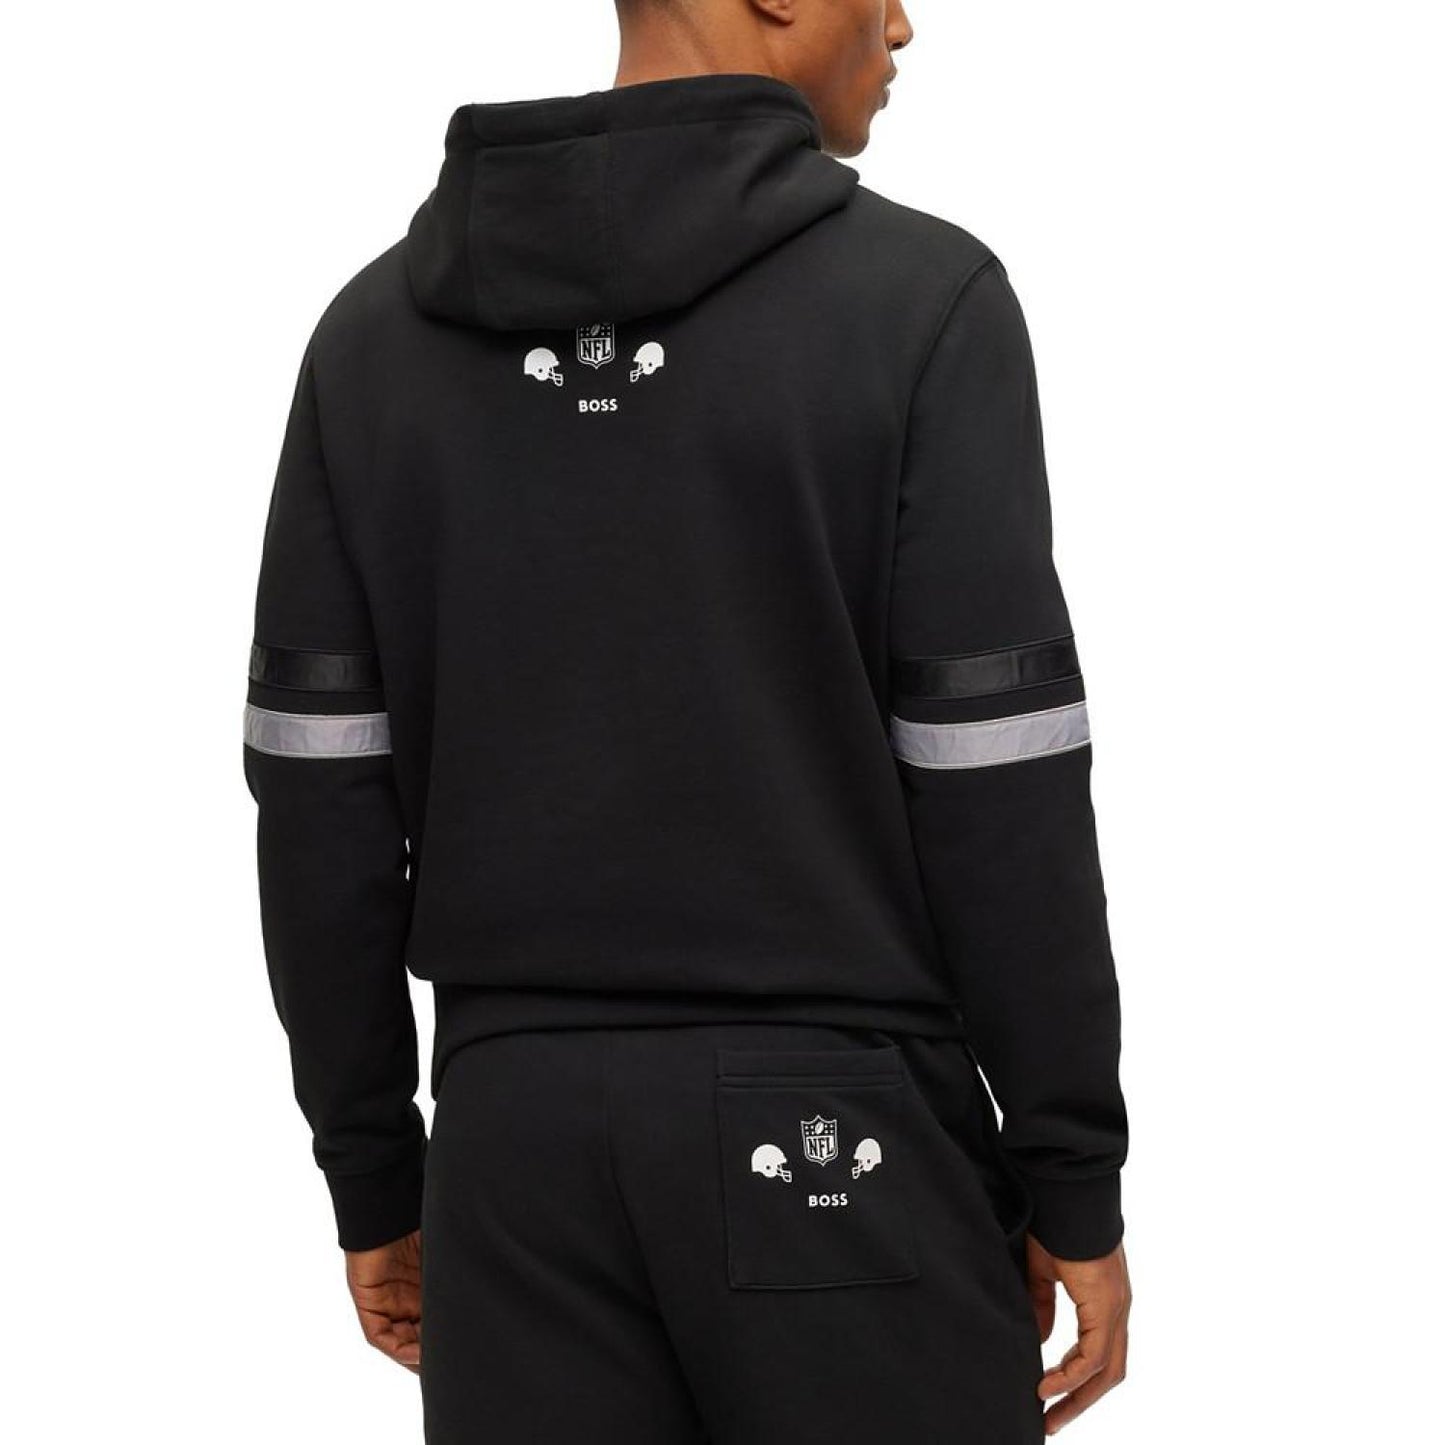 BOSS by Hugo Boss x NFL Men's Hoodie Collection